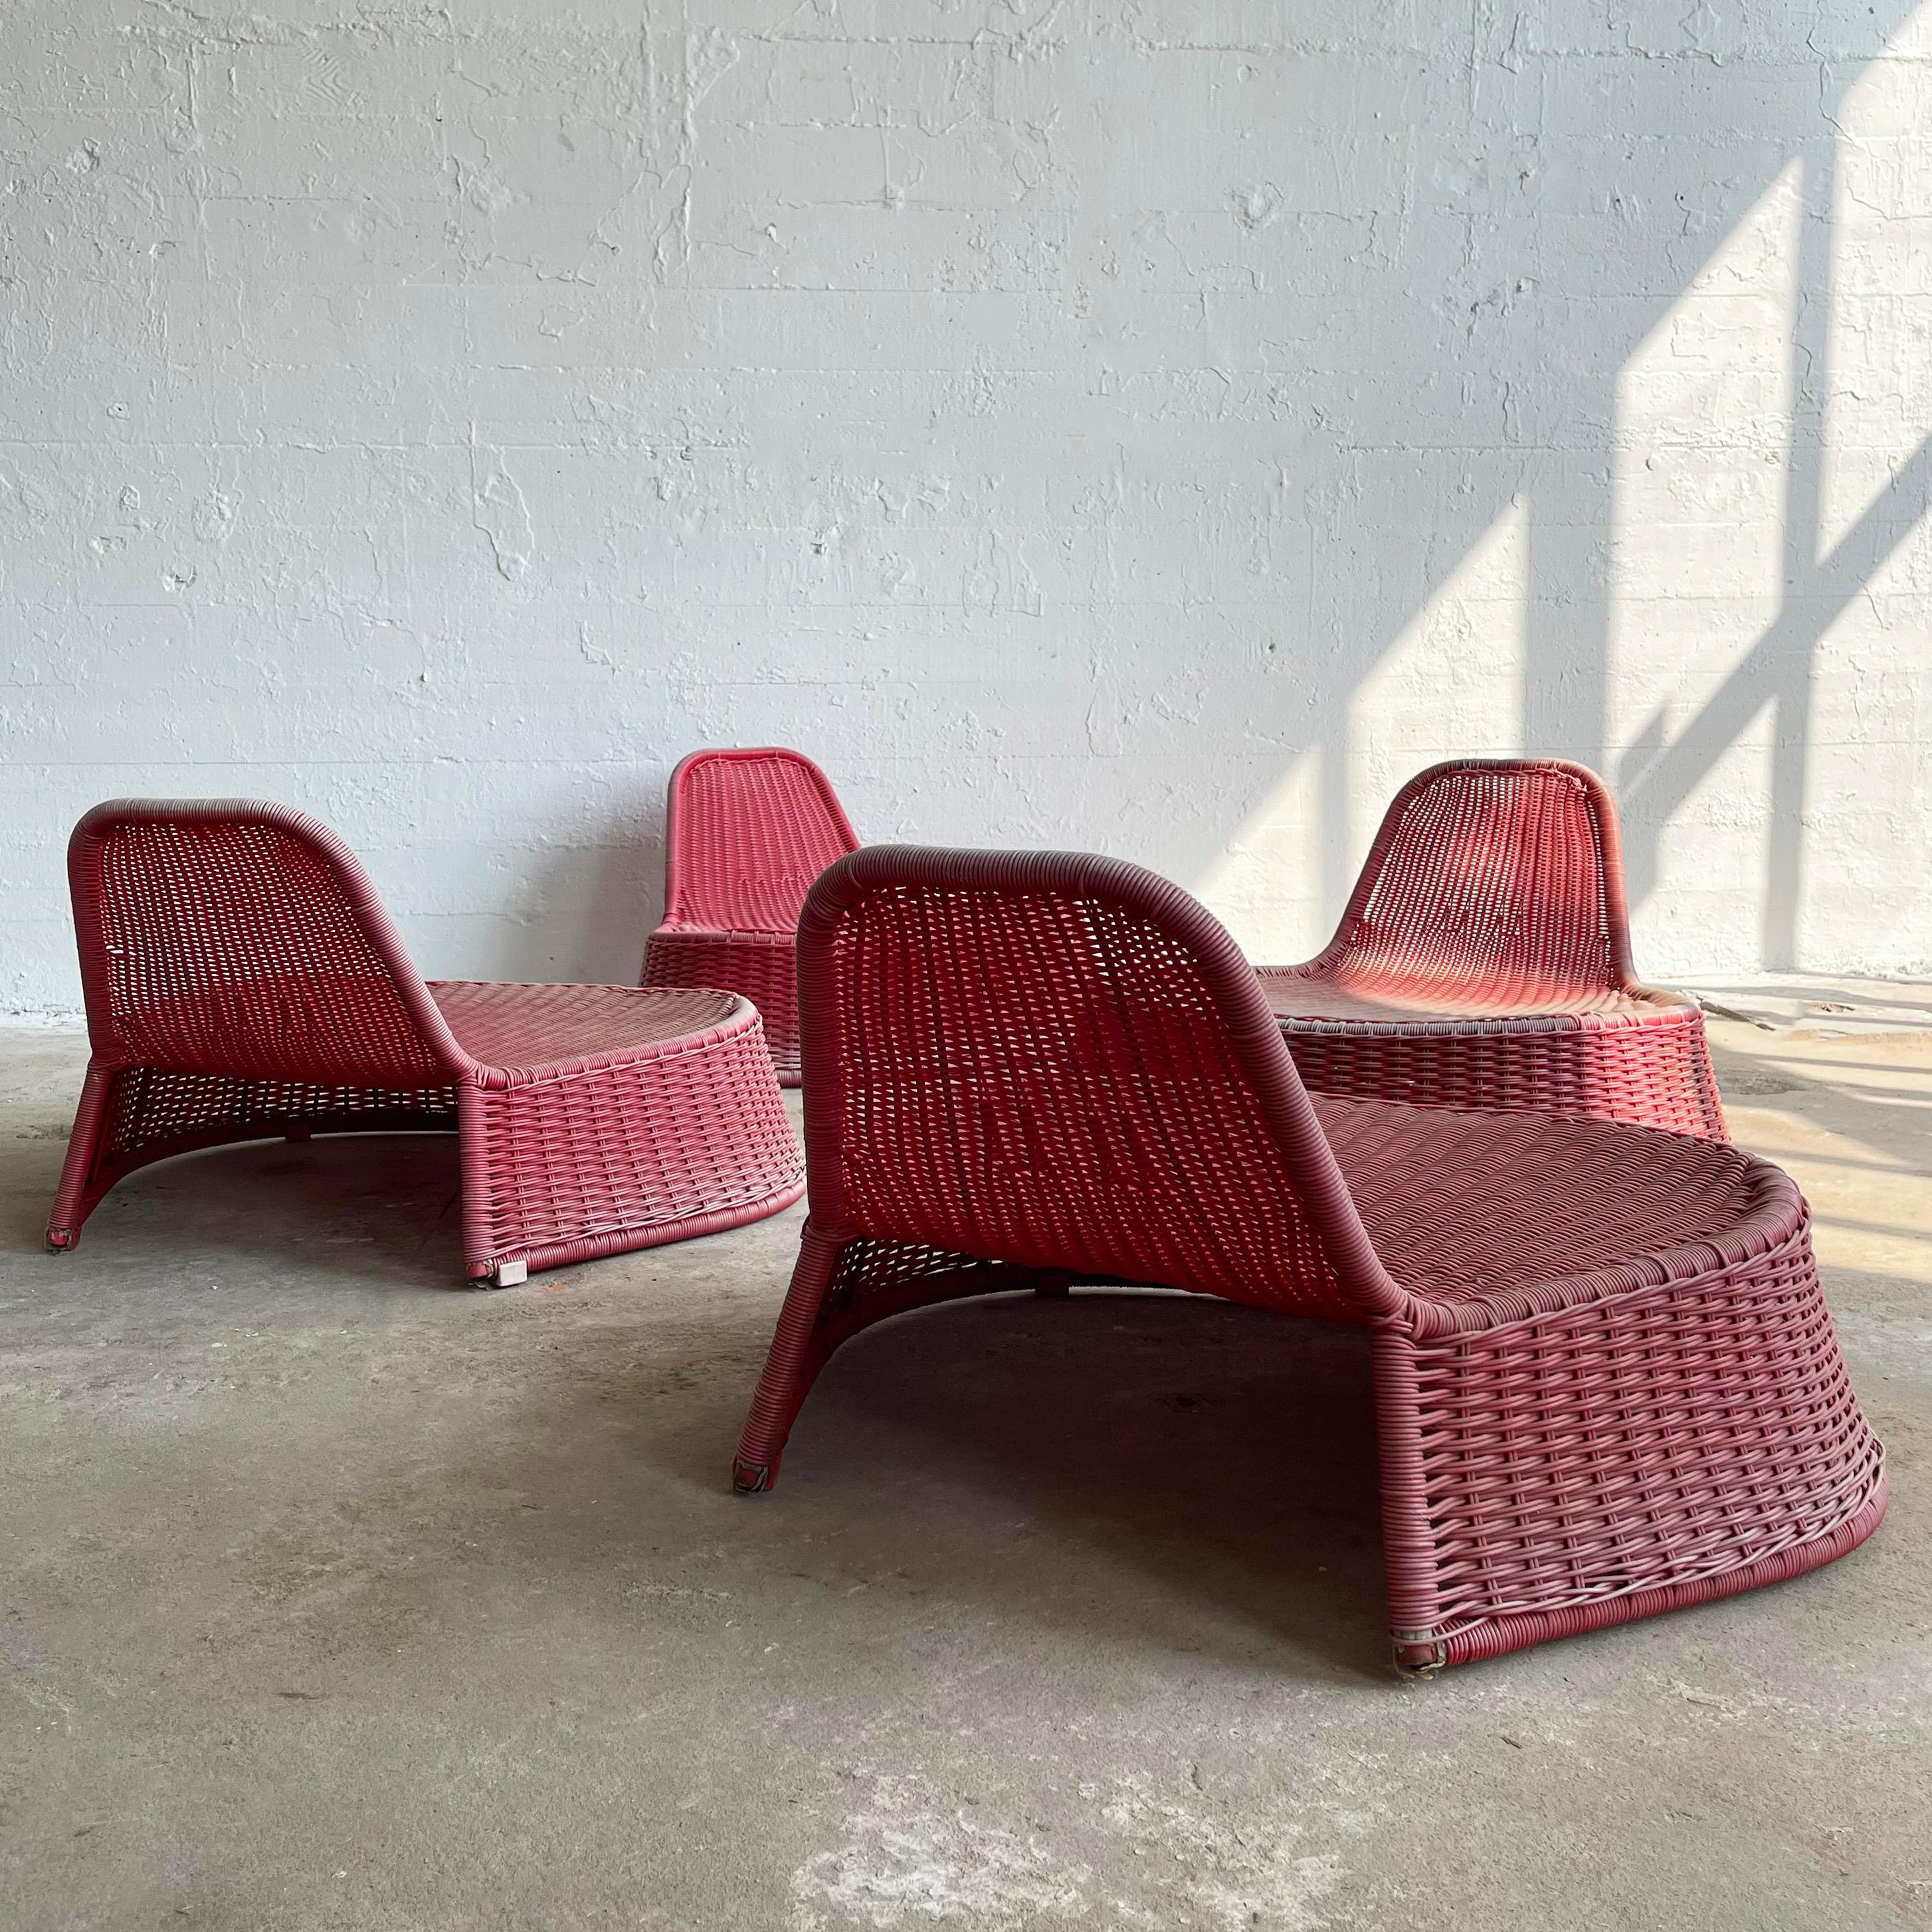 Pink Woven Outdoor Lounge Chairs By Monika Mulder For Ikea For Sale 2